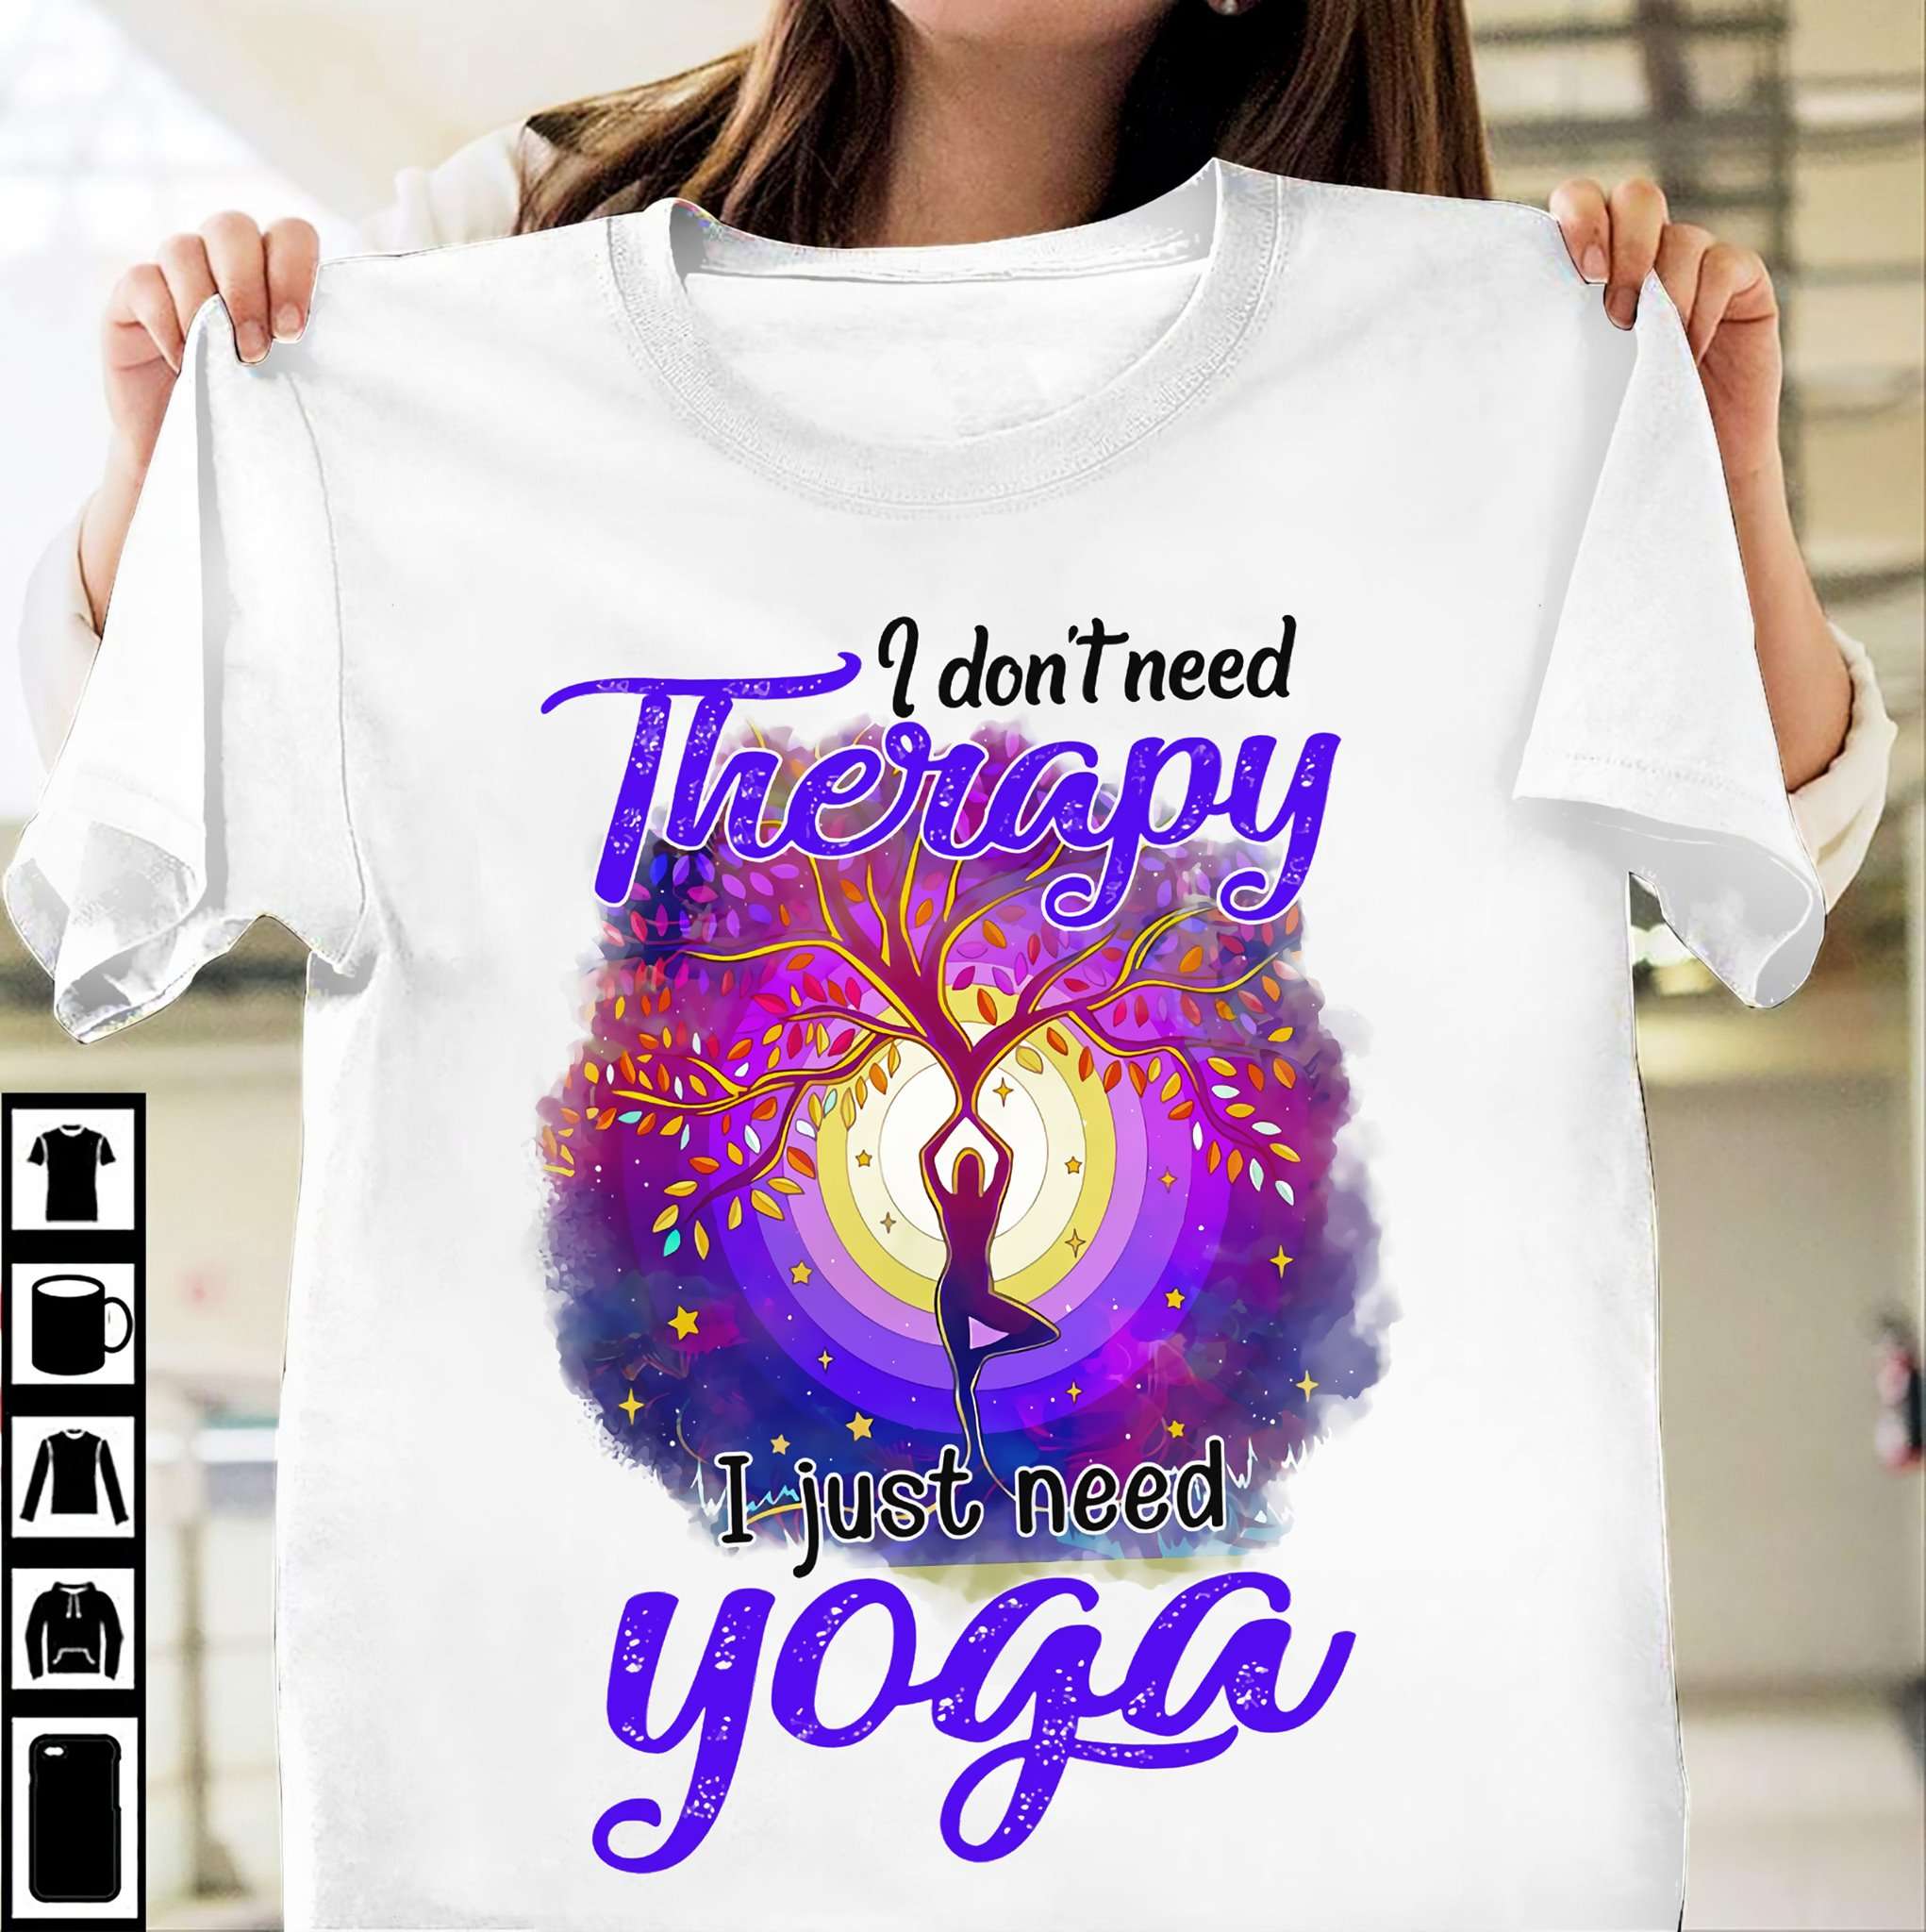 I don't need therapy I just need yoga - Yoga therapy, love doing yoga